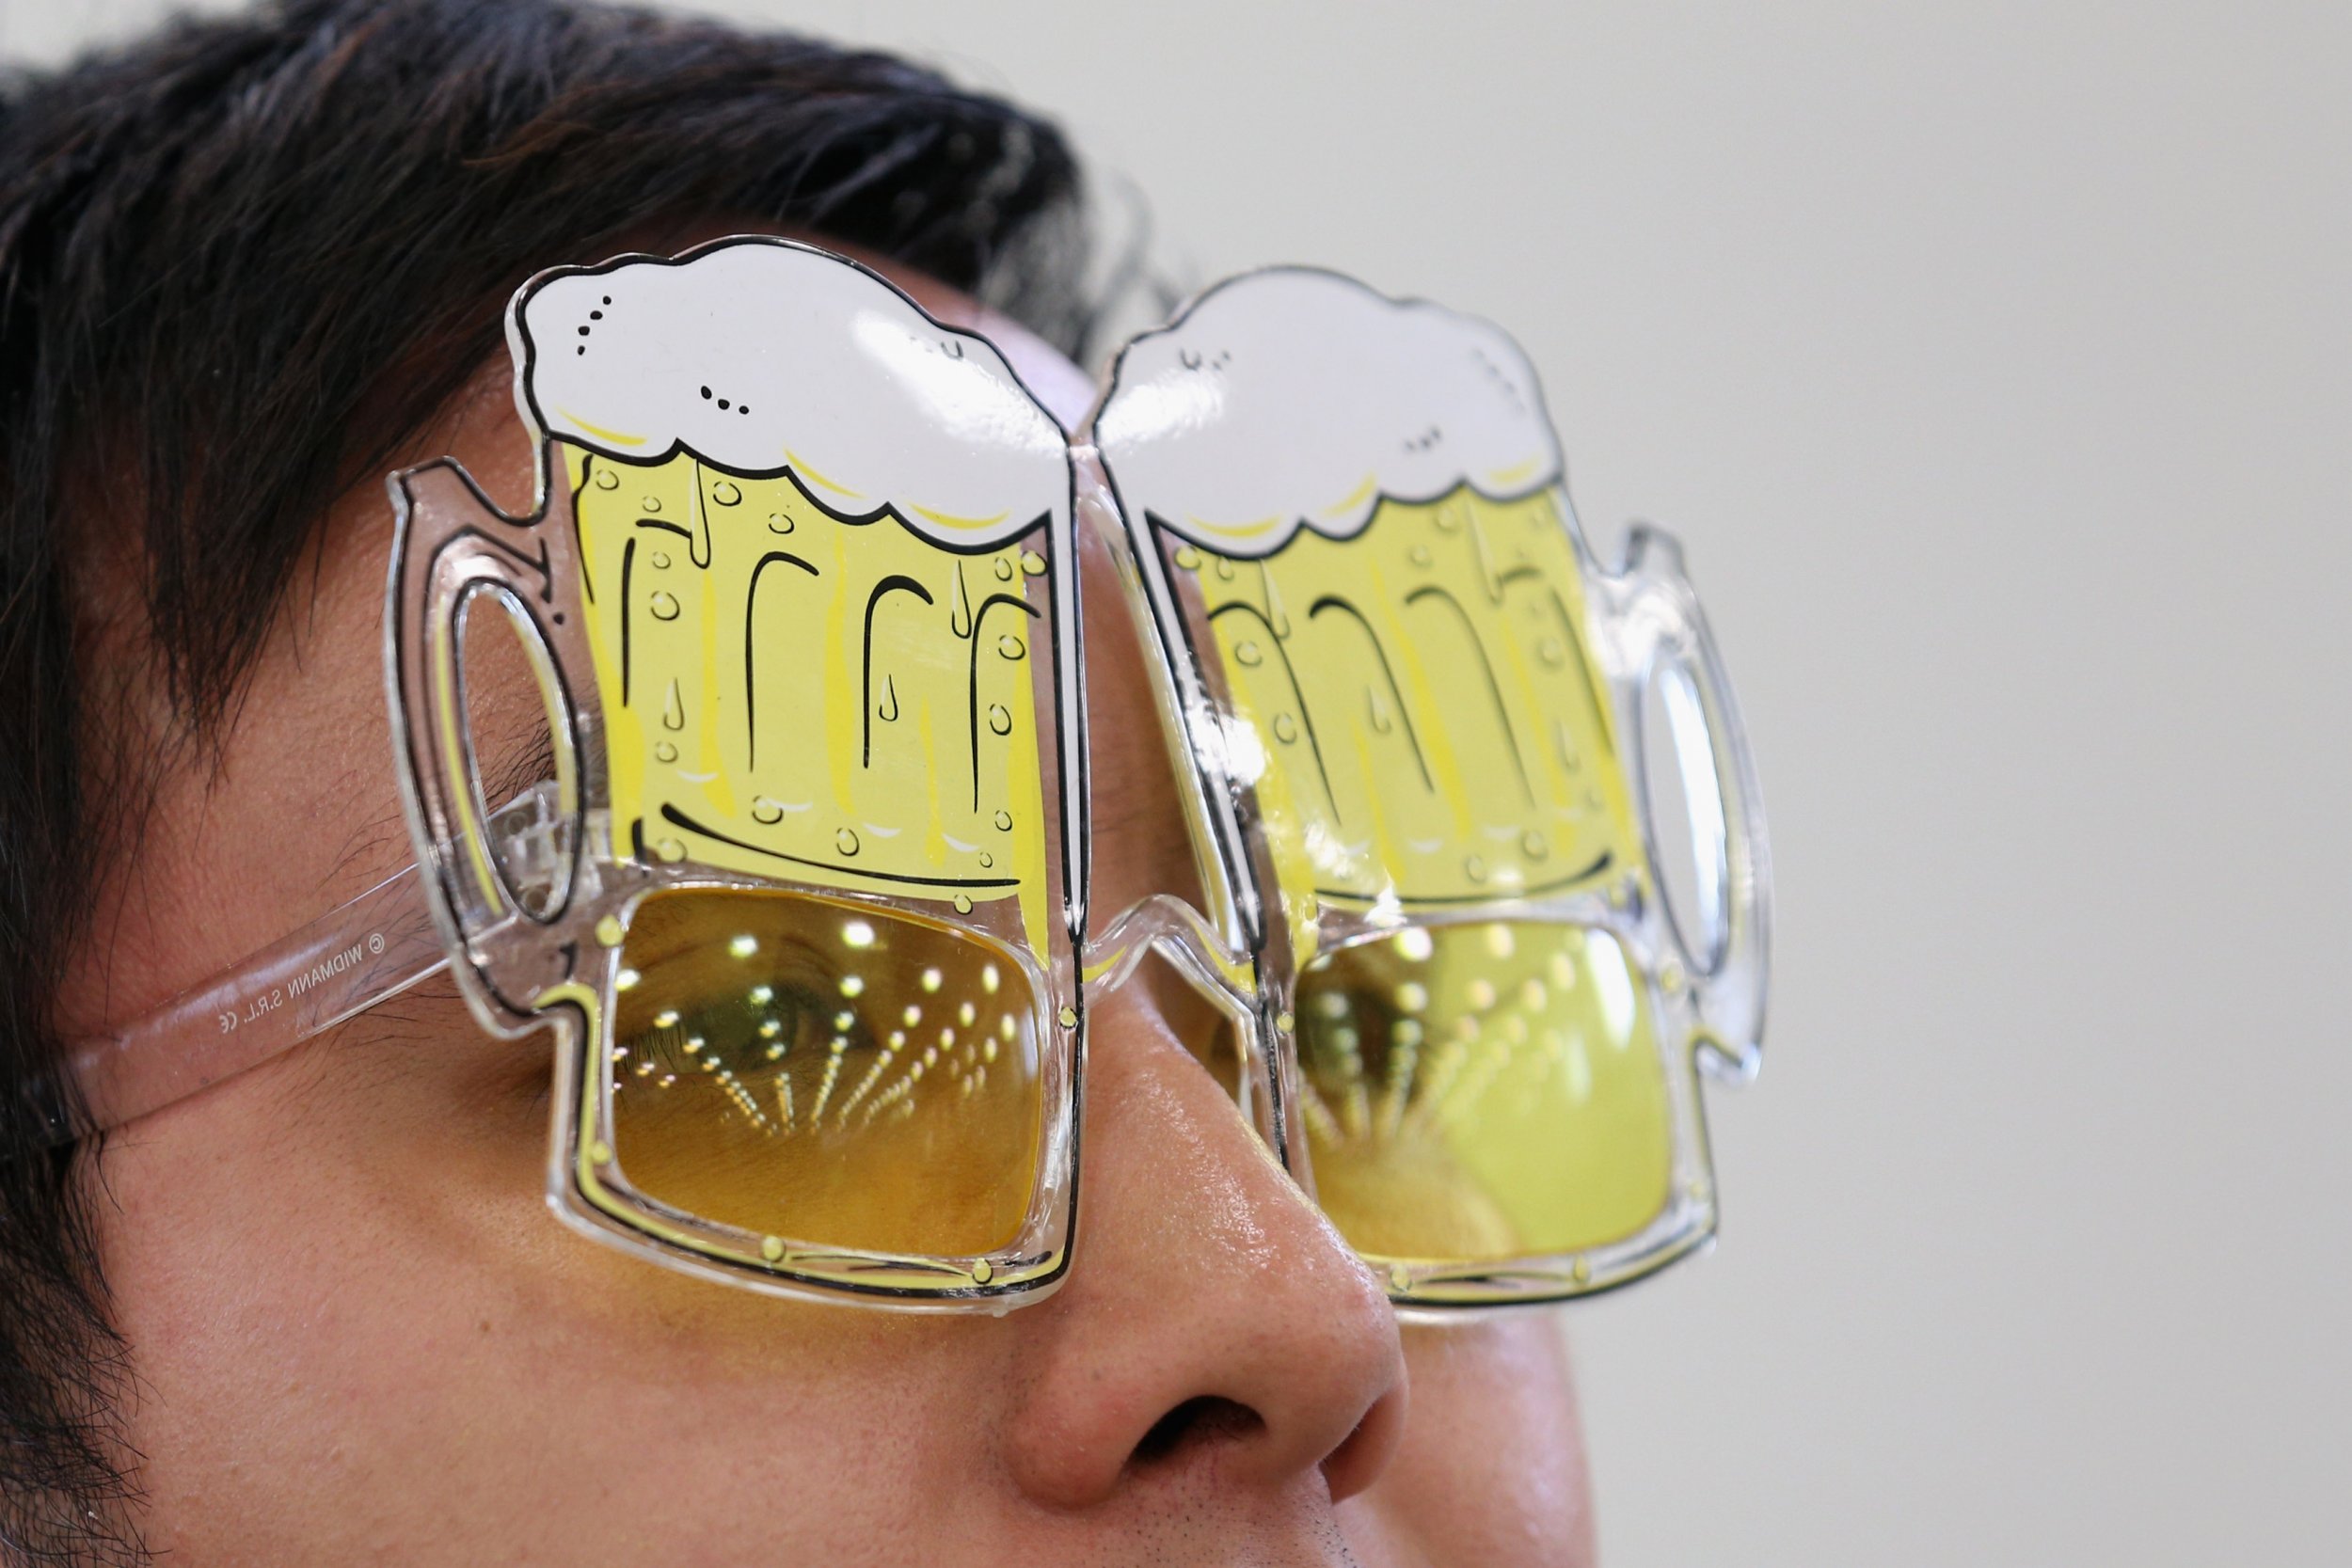 Beer goggles